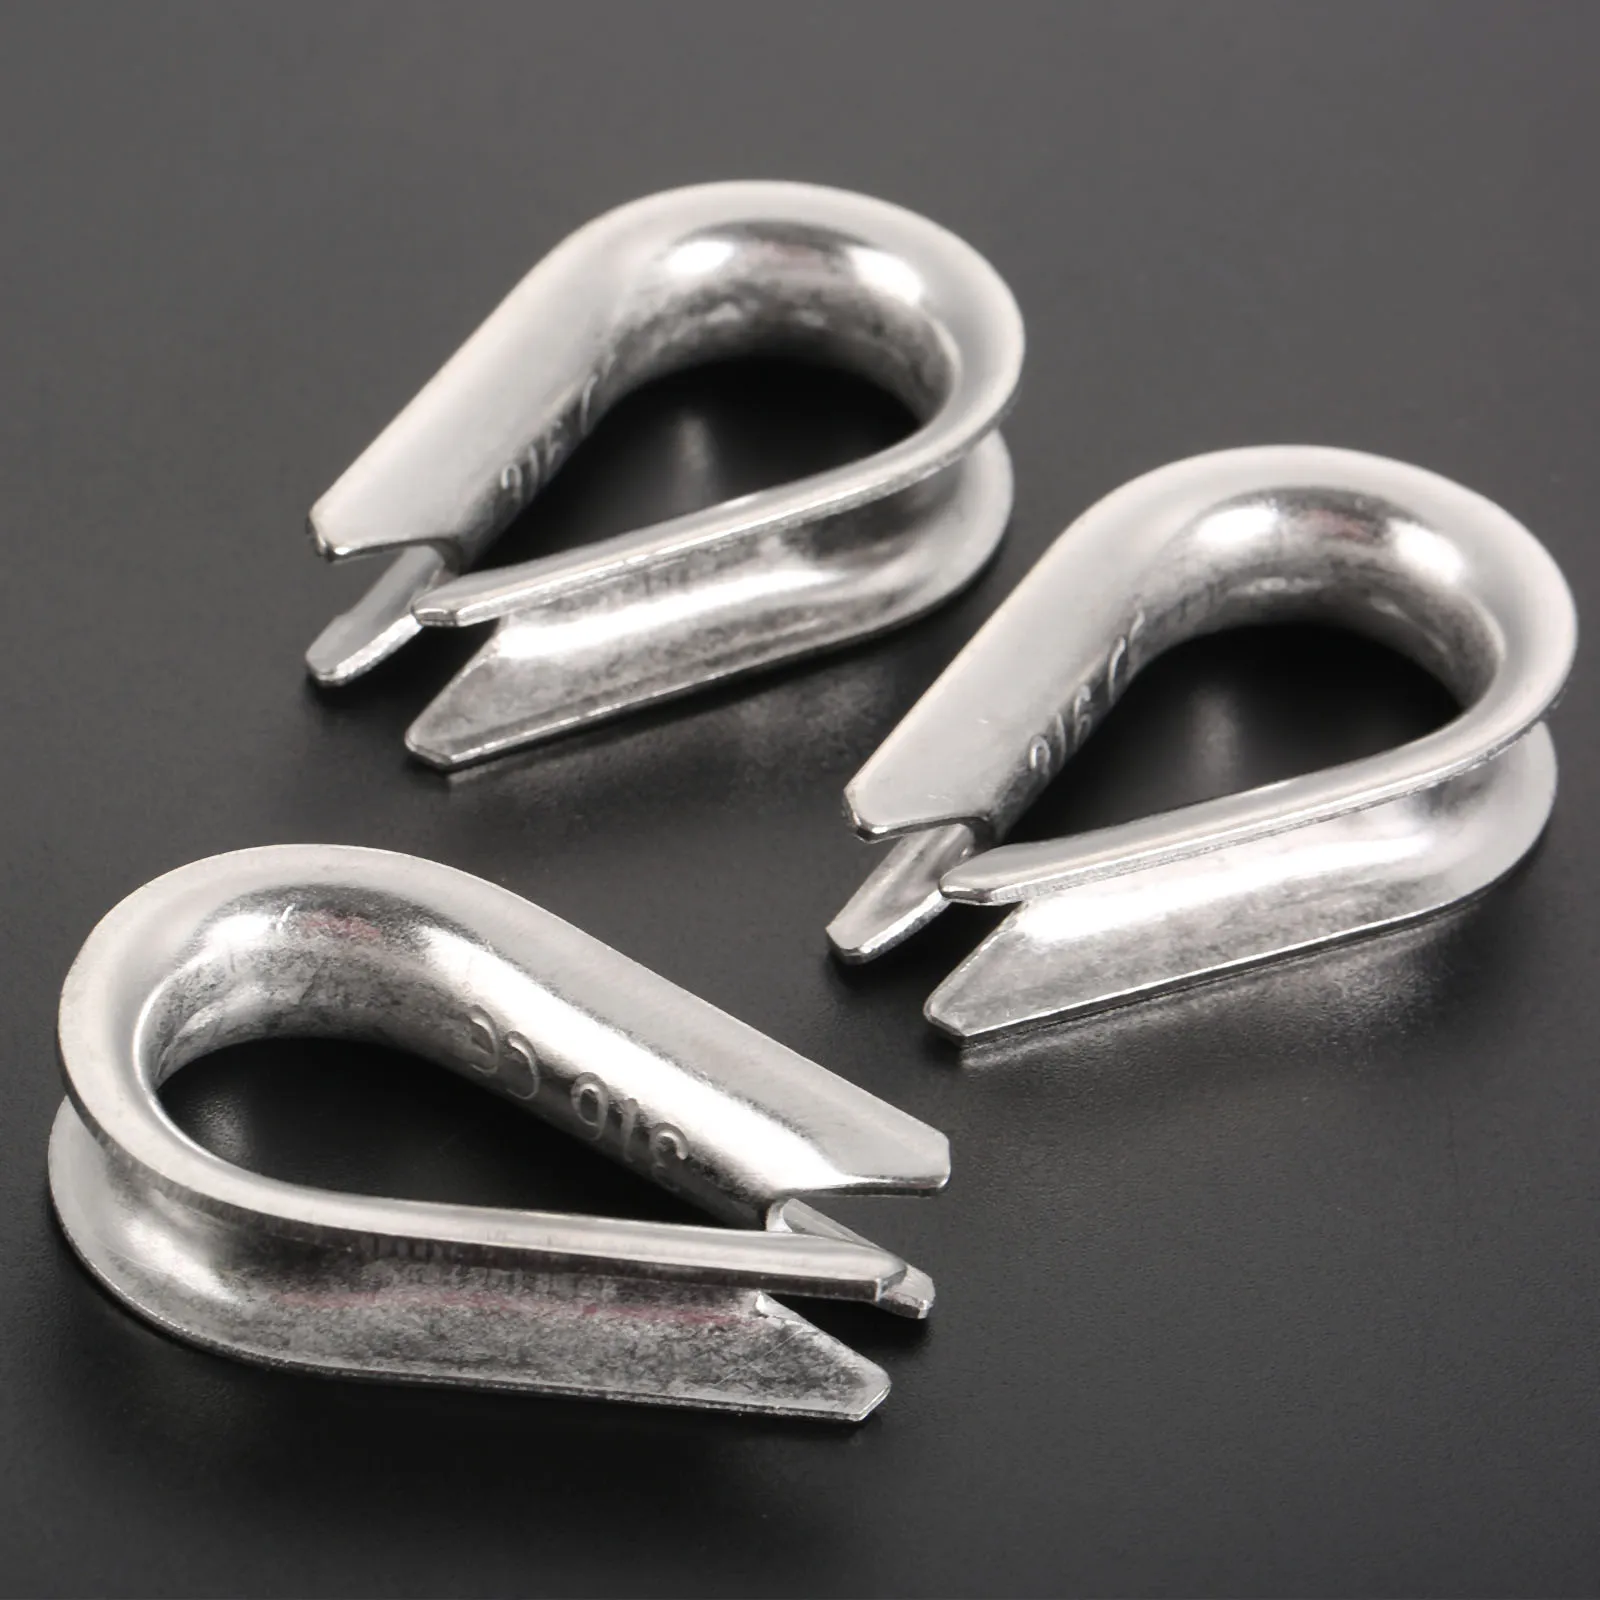 10Pcs Wire Rope Thimbles Marine Grade 316 Stainless Steel for 8mm / 5/16 Inch Diameter Wire Rope/Cable Boats Accessories 10m 304 stainless steel pvc coated steel wire rope soft sling 7 7 clothesline 5mm diameter